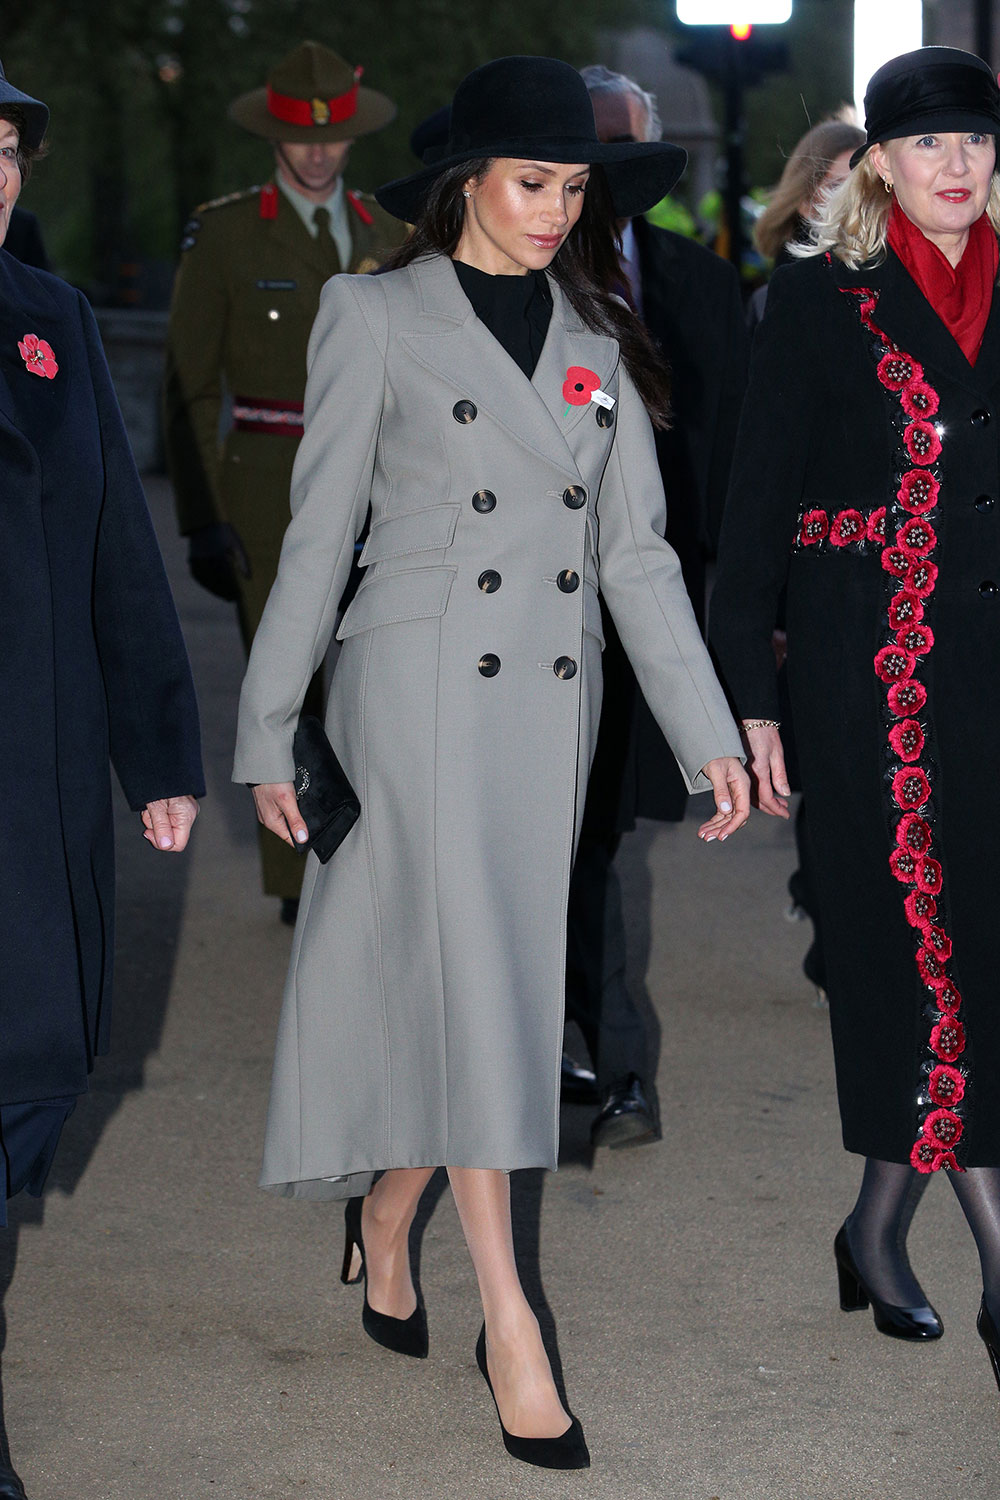 April 25, 2018: Meghan Markle attended an ANZAC Day dawn service alongside New Zealand and Australian troops in London's Hyde Park Corner. She wore a Smythe coat  with Sarah Flint heels and carried a Gucci mini bag.